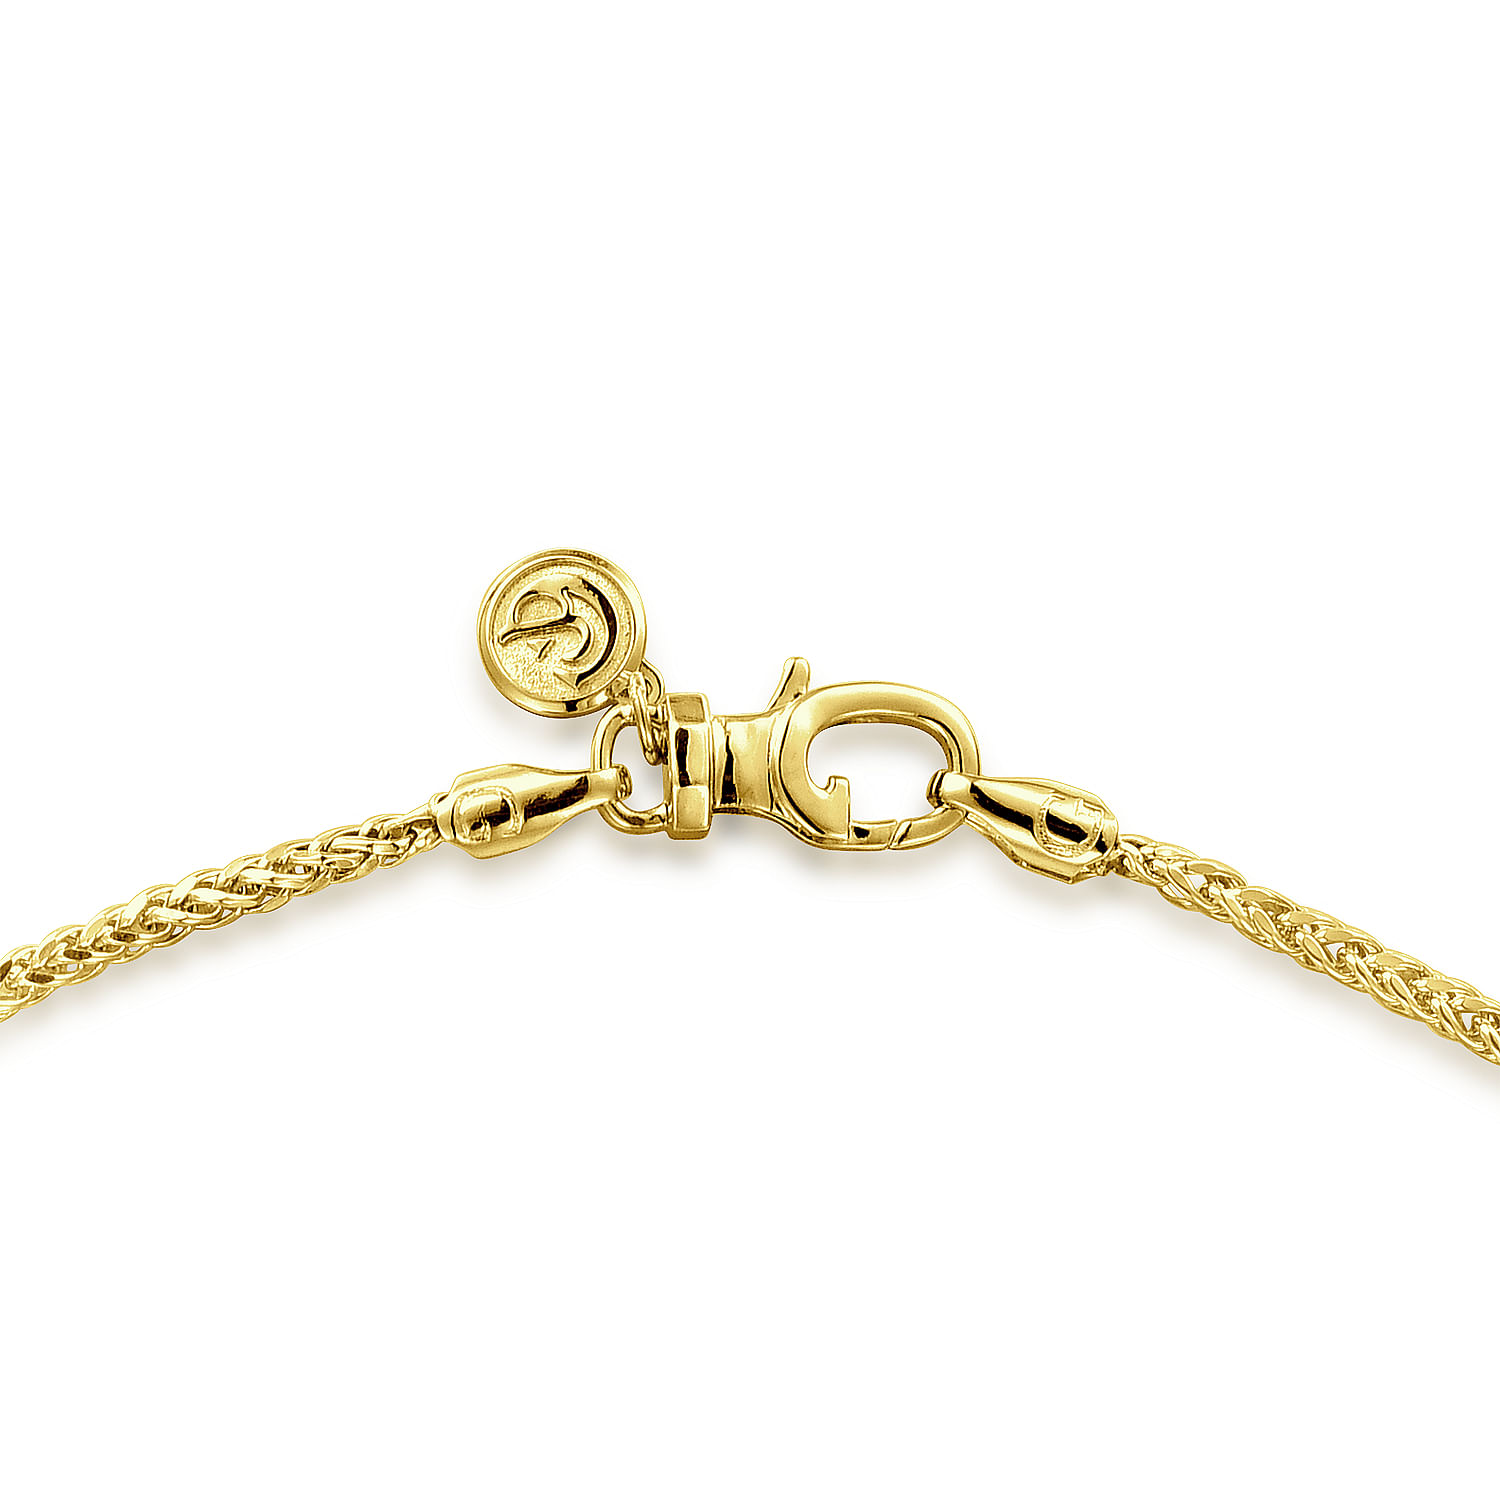 20 Inch 14K Yellow Gold Hollow Men's Wheat Chain Necklace